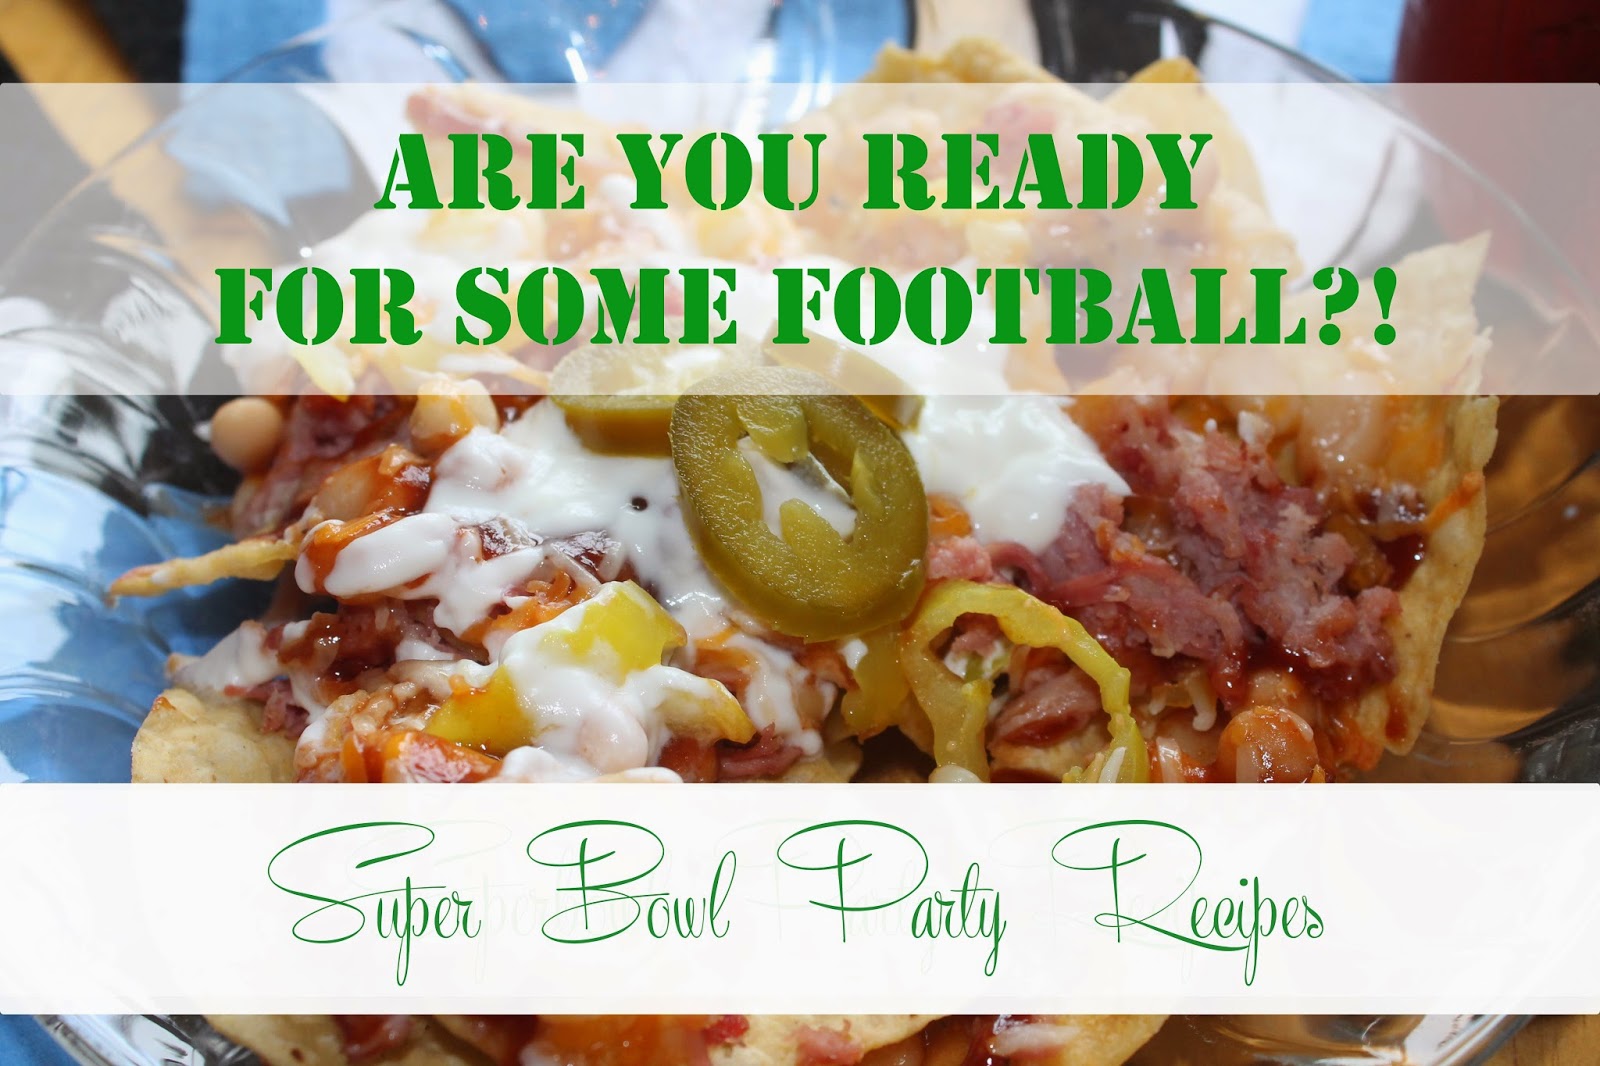 super bowl party recipes, the altered past blog